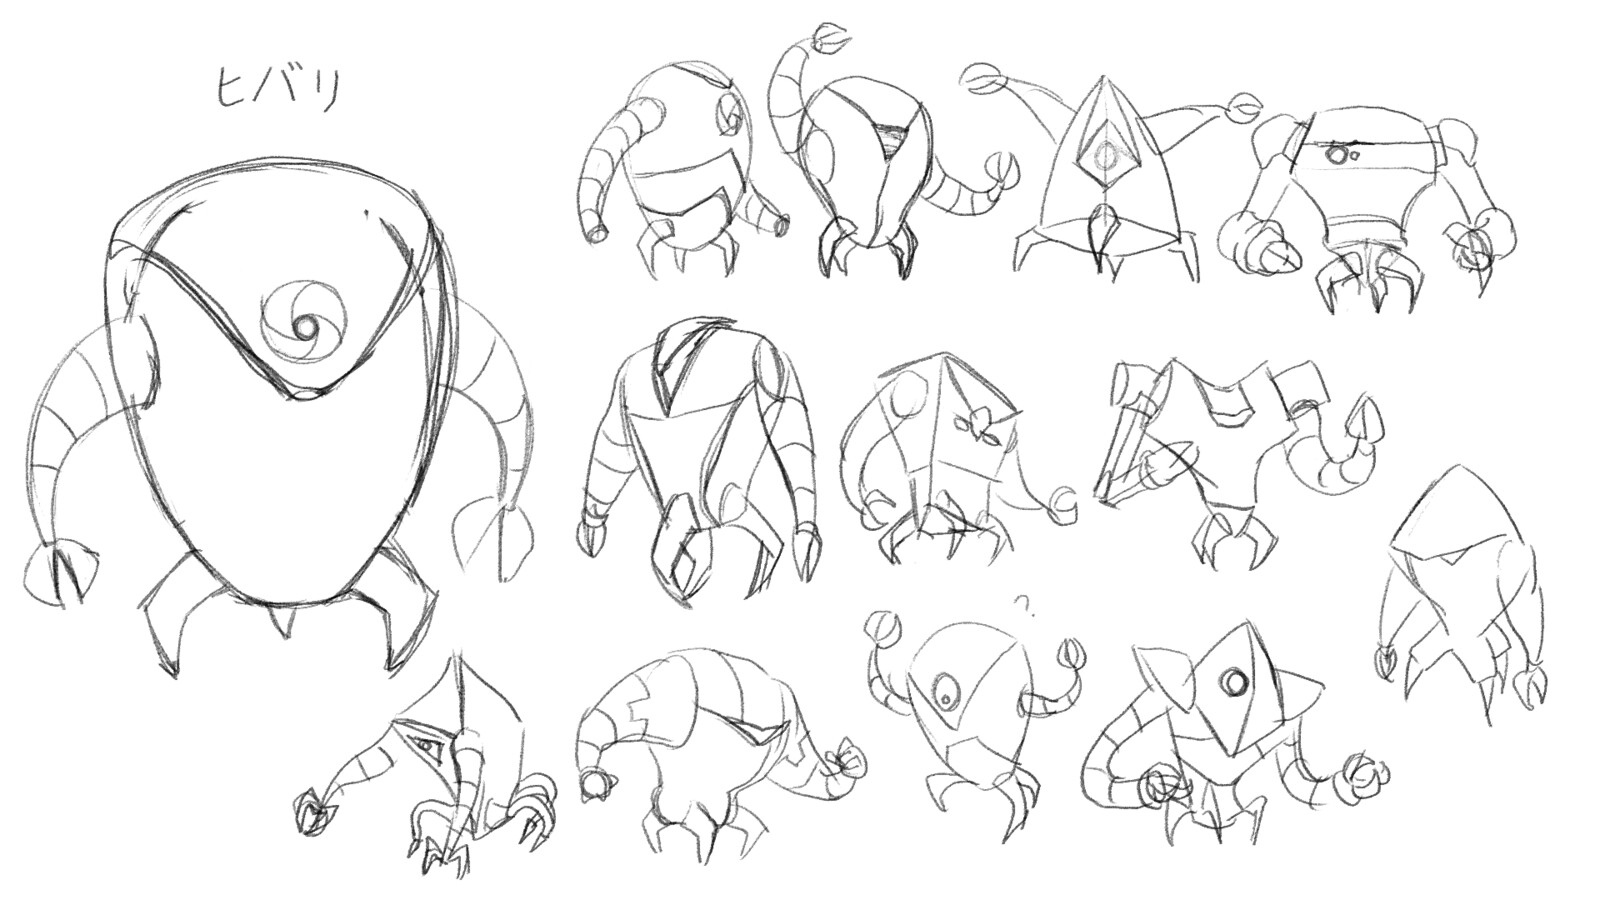 Sketches for possible robot designs